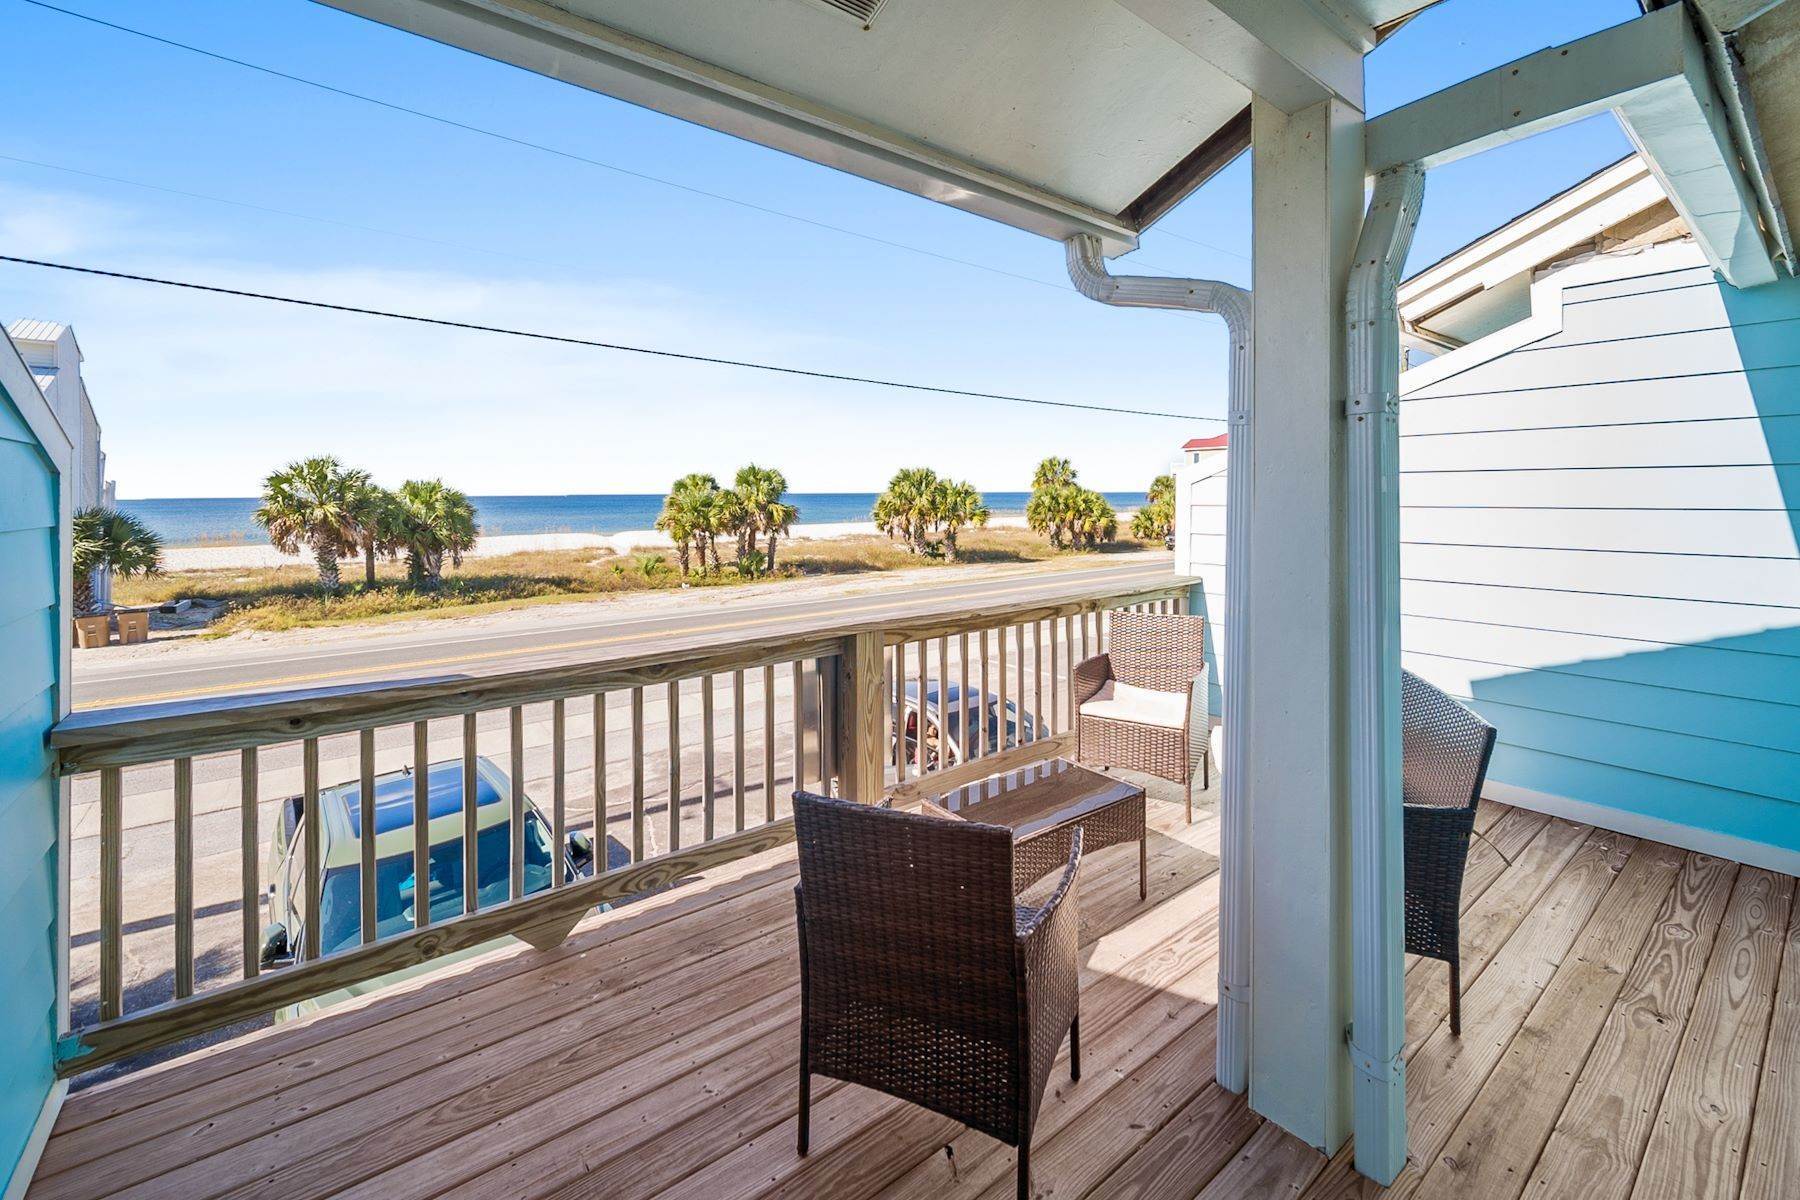 Townhouse for Sale at Well-Located Townhouse Steps From Beach With Superb Gulf Views 7310 West Highway 98 Port St. Joe, Florida 32456 United States